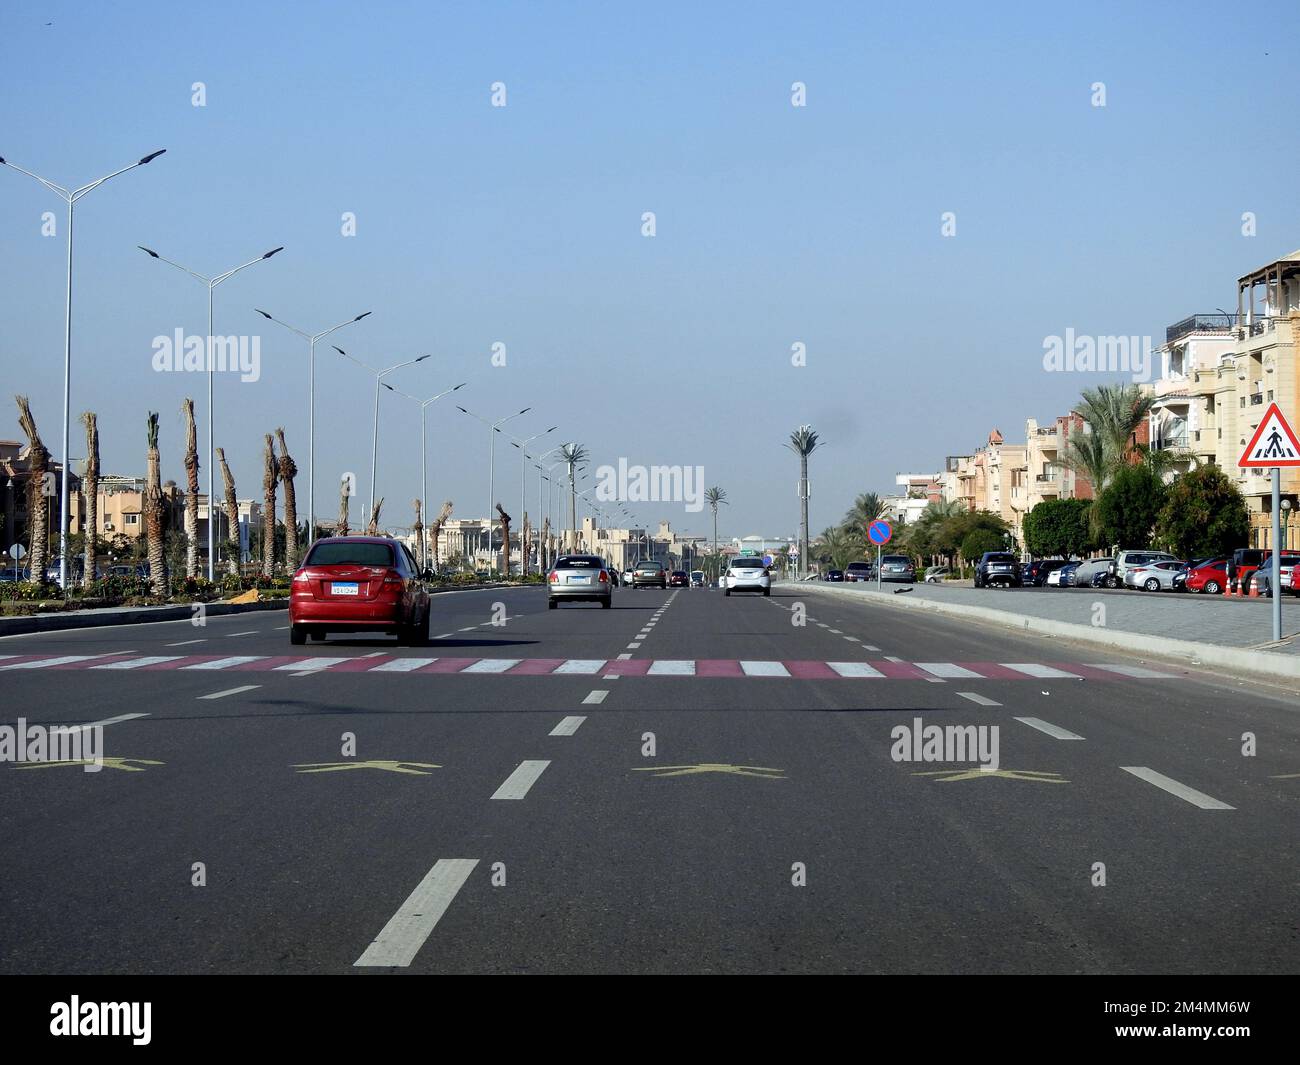 Cairo, Egypt, December 21 2022: Pedestrian crossing area on a highway road axis in Egypt with instructive paint on the asphalt and a road sign to inst Stock Photo